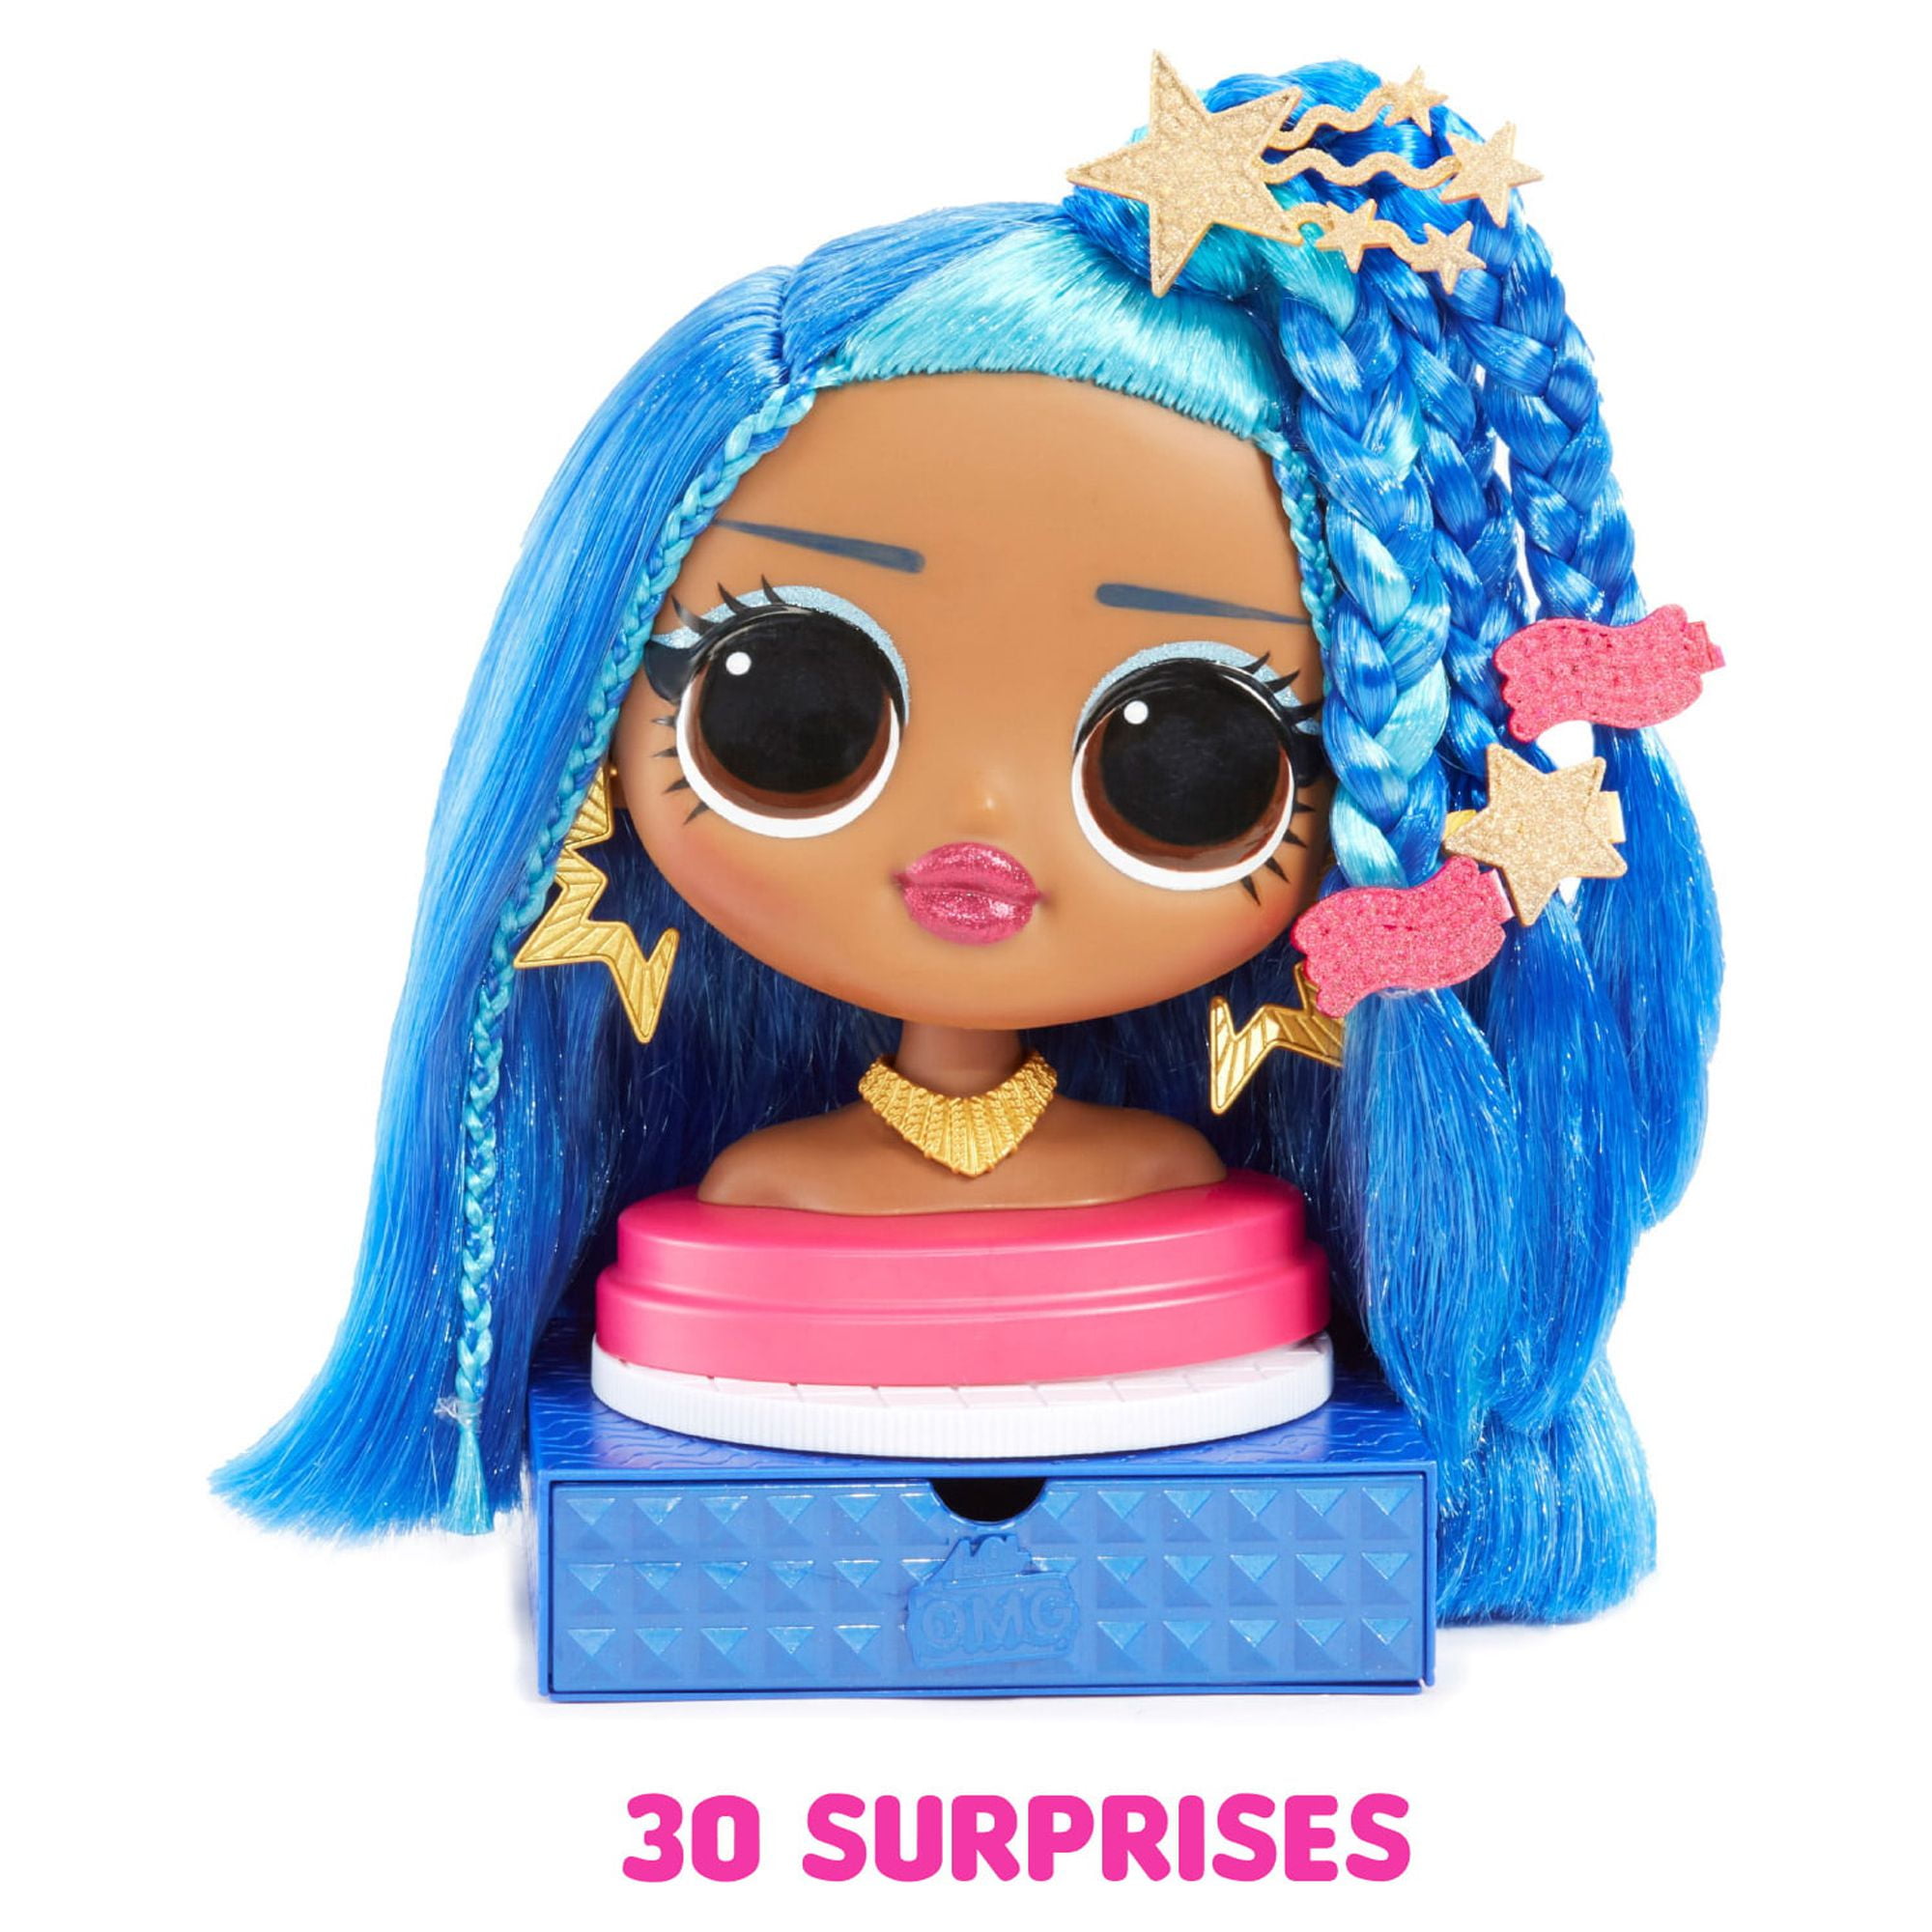 Lol Surprise! O.M.G. Miss Independent Fashion Doll